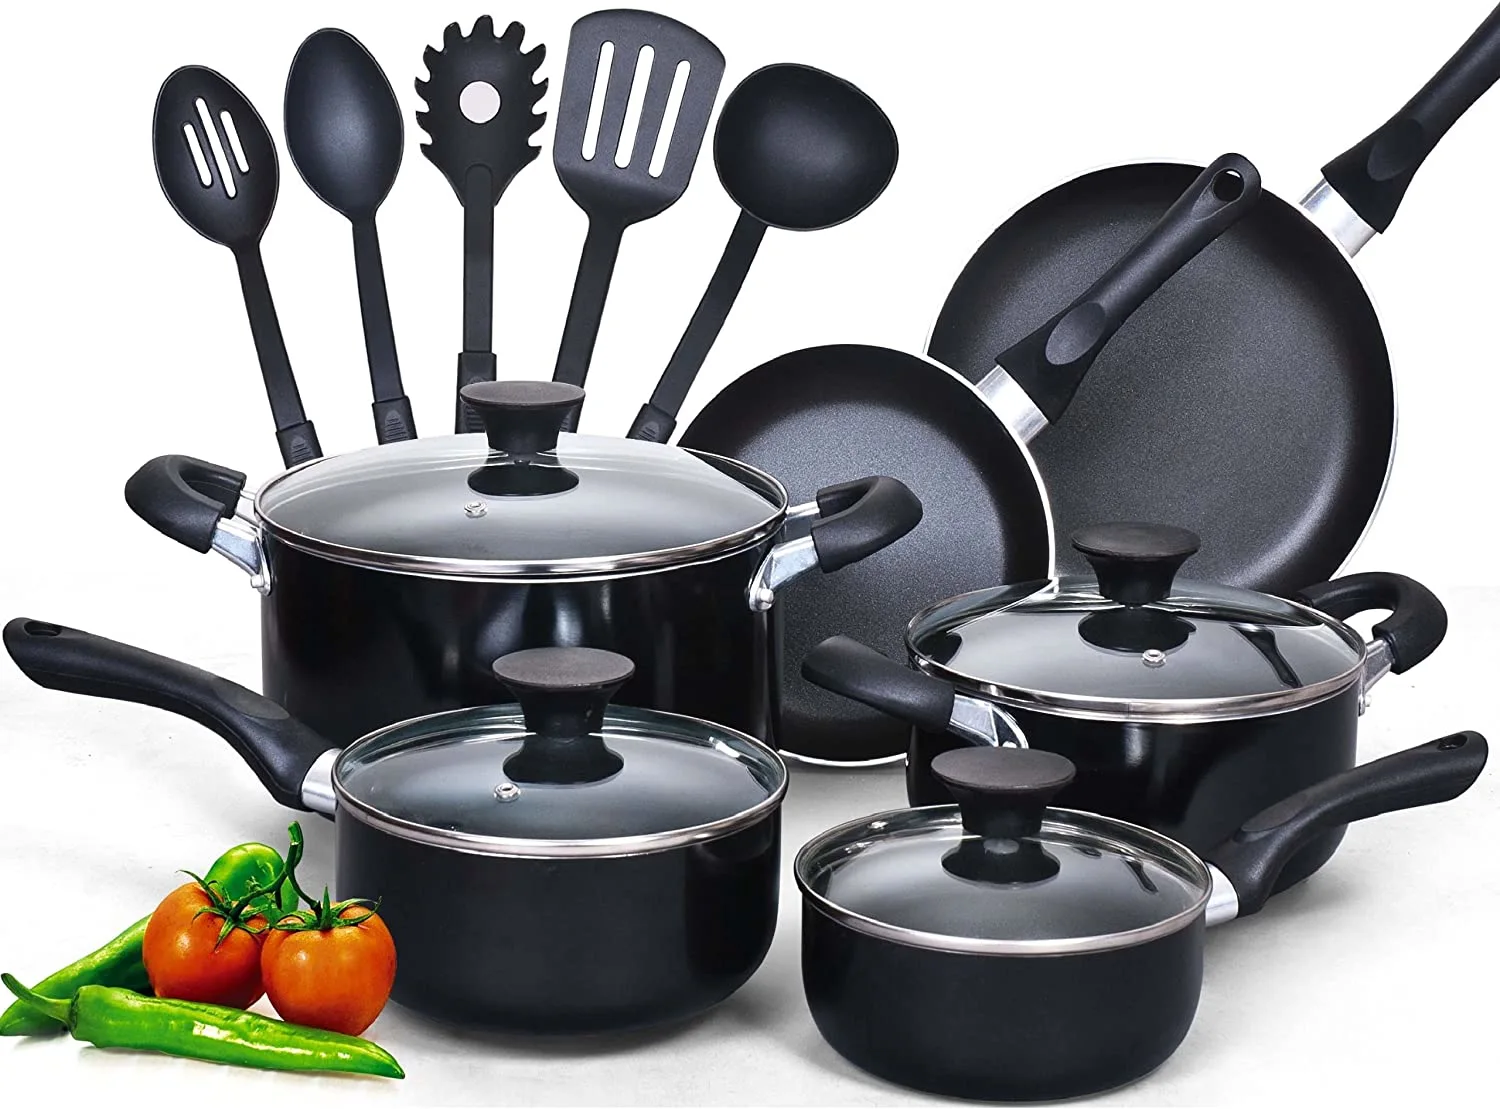 15-Piece Nonstick Stay Cool Handle Cookware Set, Black